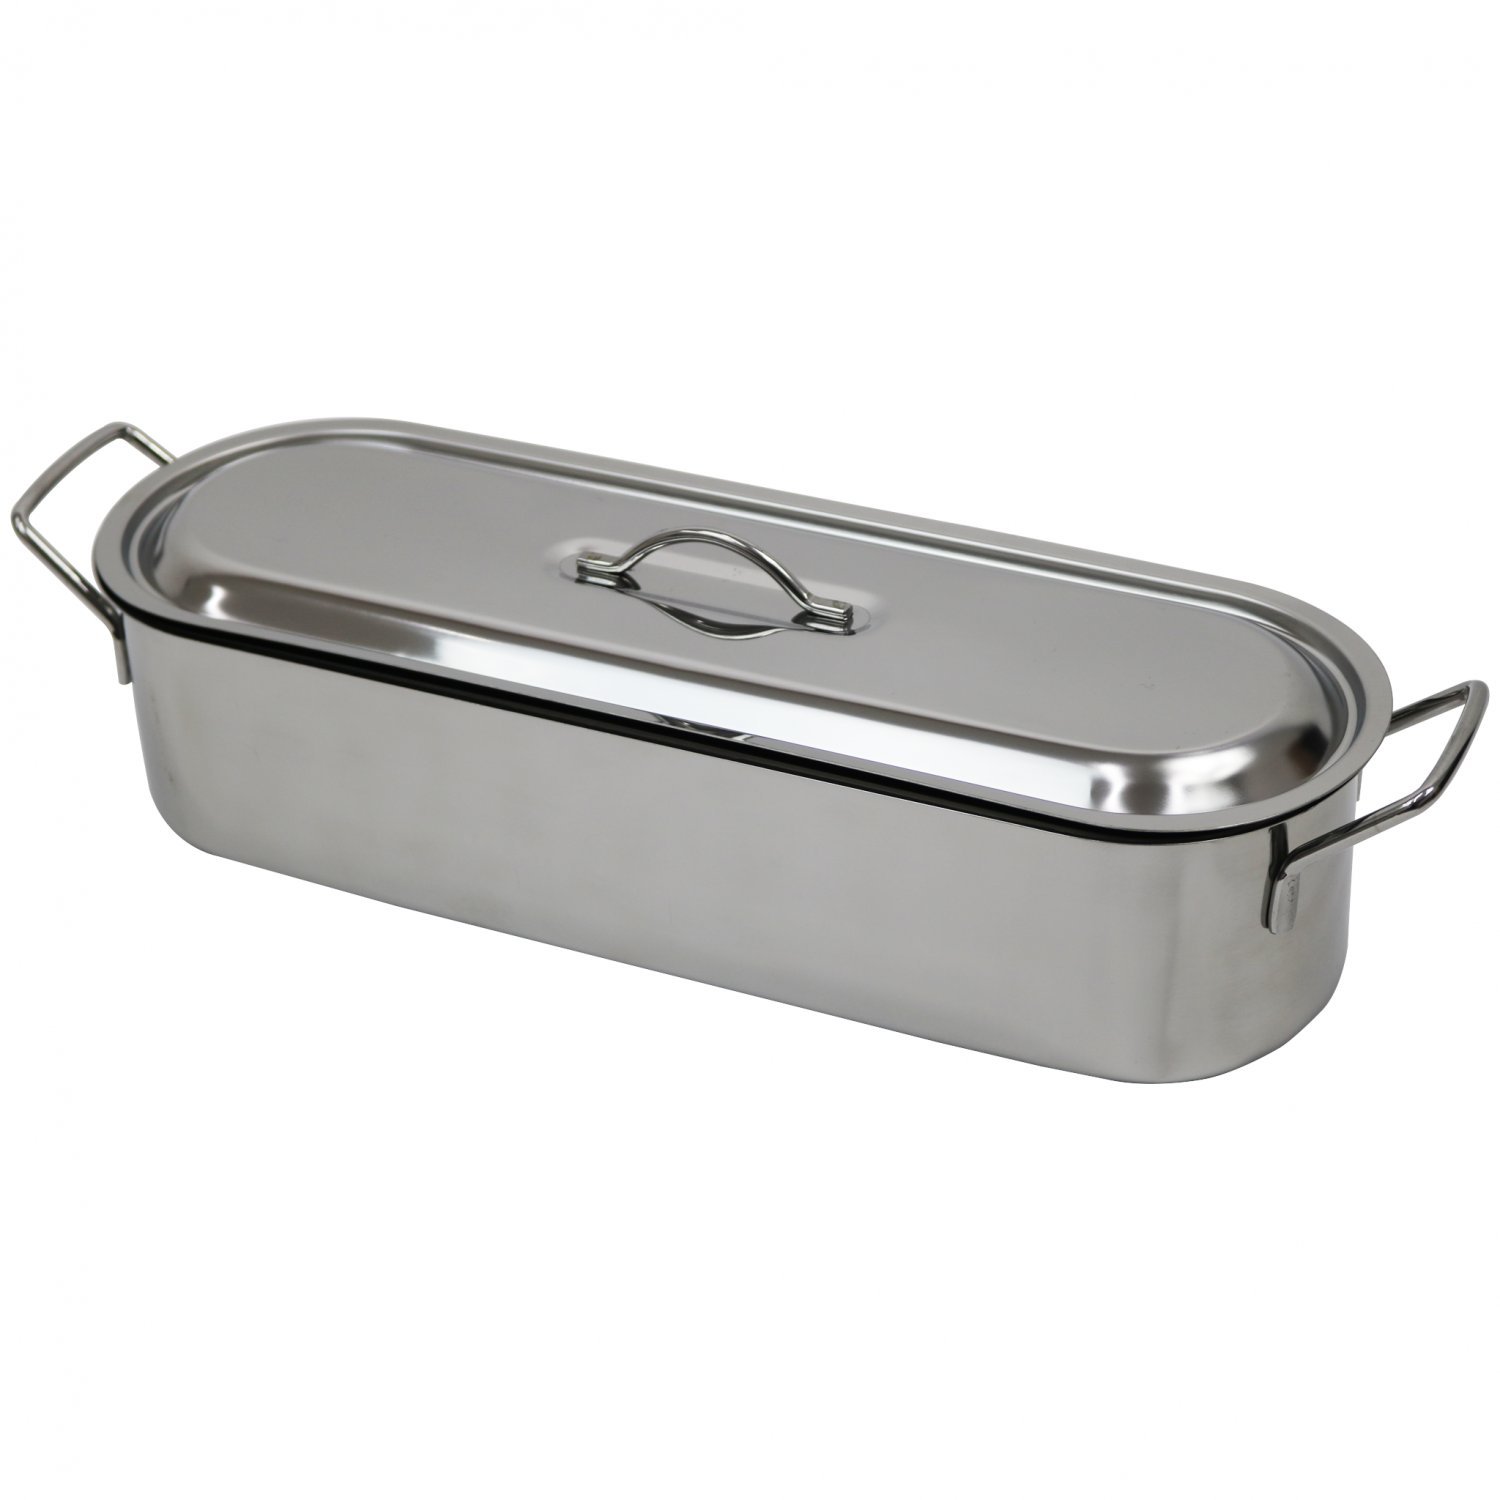 All-Clad All-Clad Fish Poacher Steamer Stainless Steel Sculpted Fish Handle 18" x 7" x 4" 